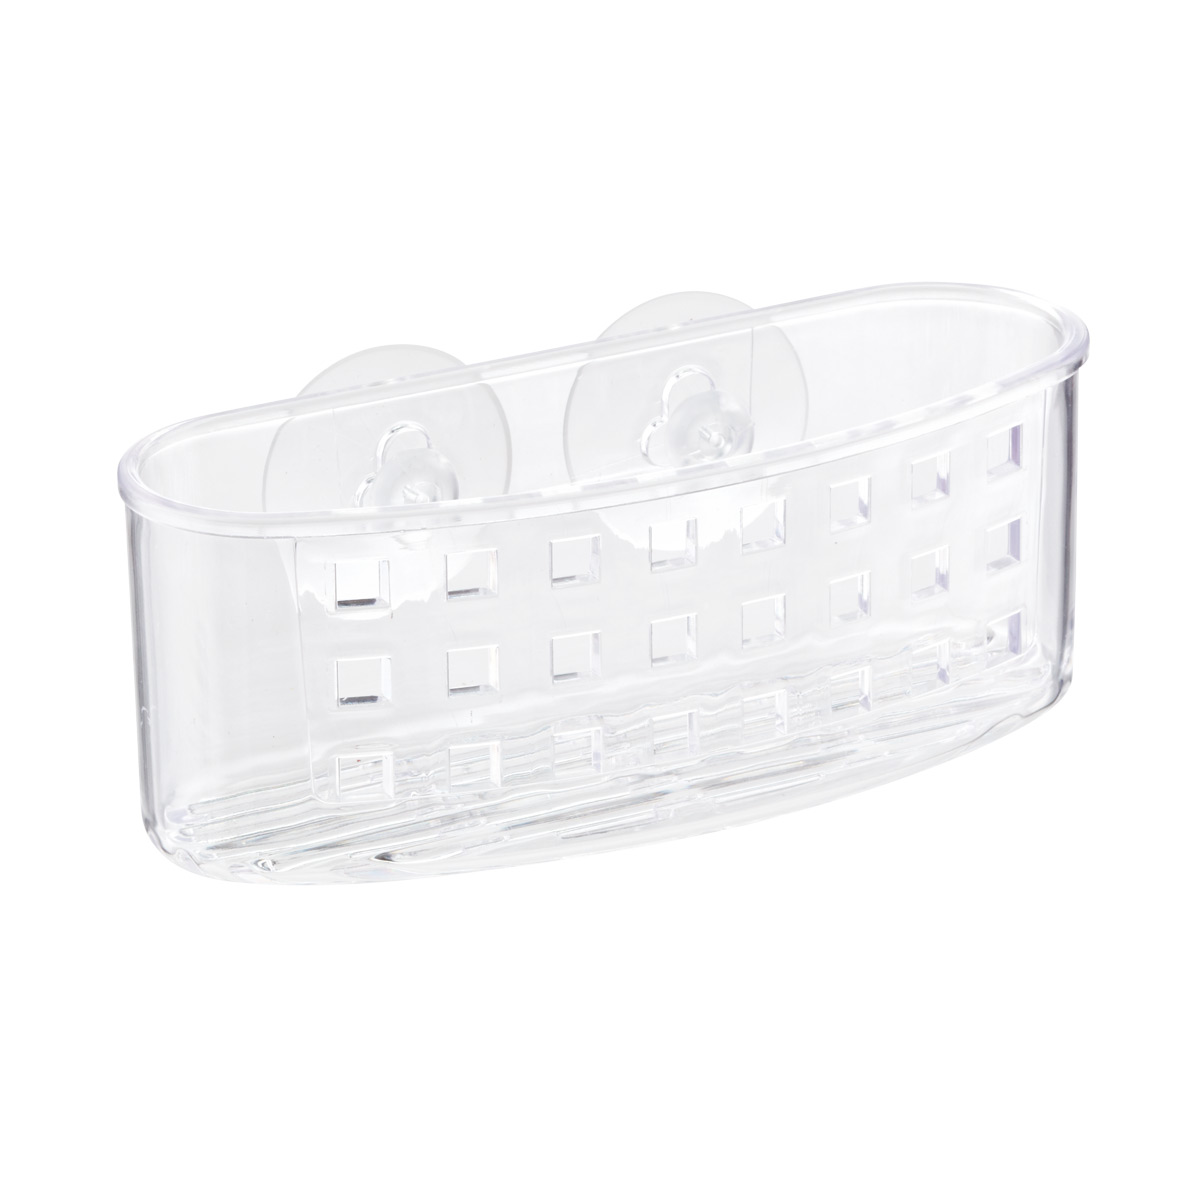 iDesign 63883 Lineo Silicone Kitchen Sink Tray for Sponges